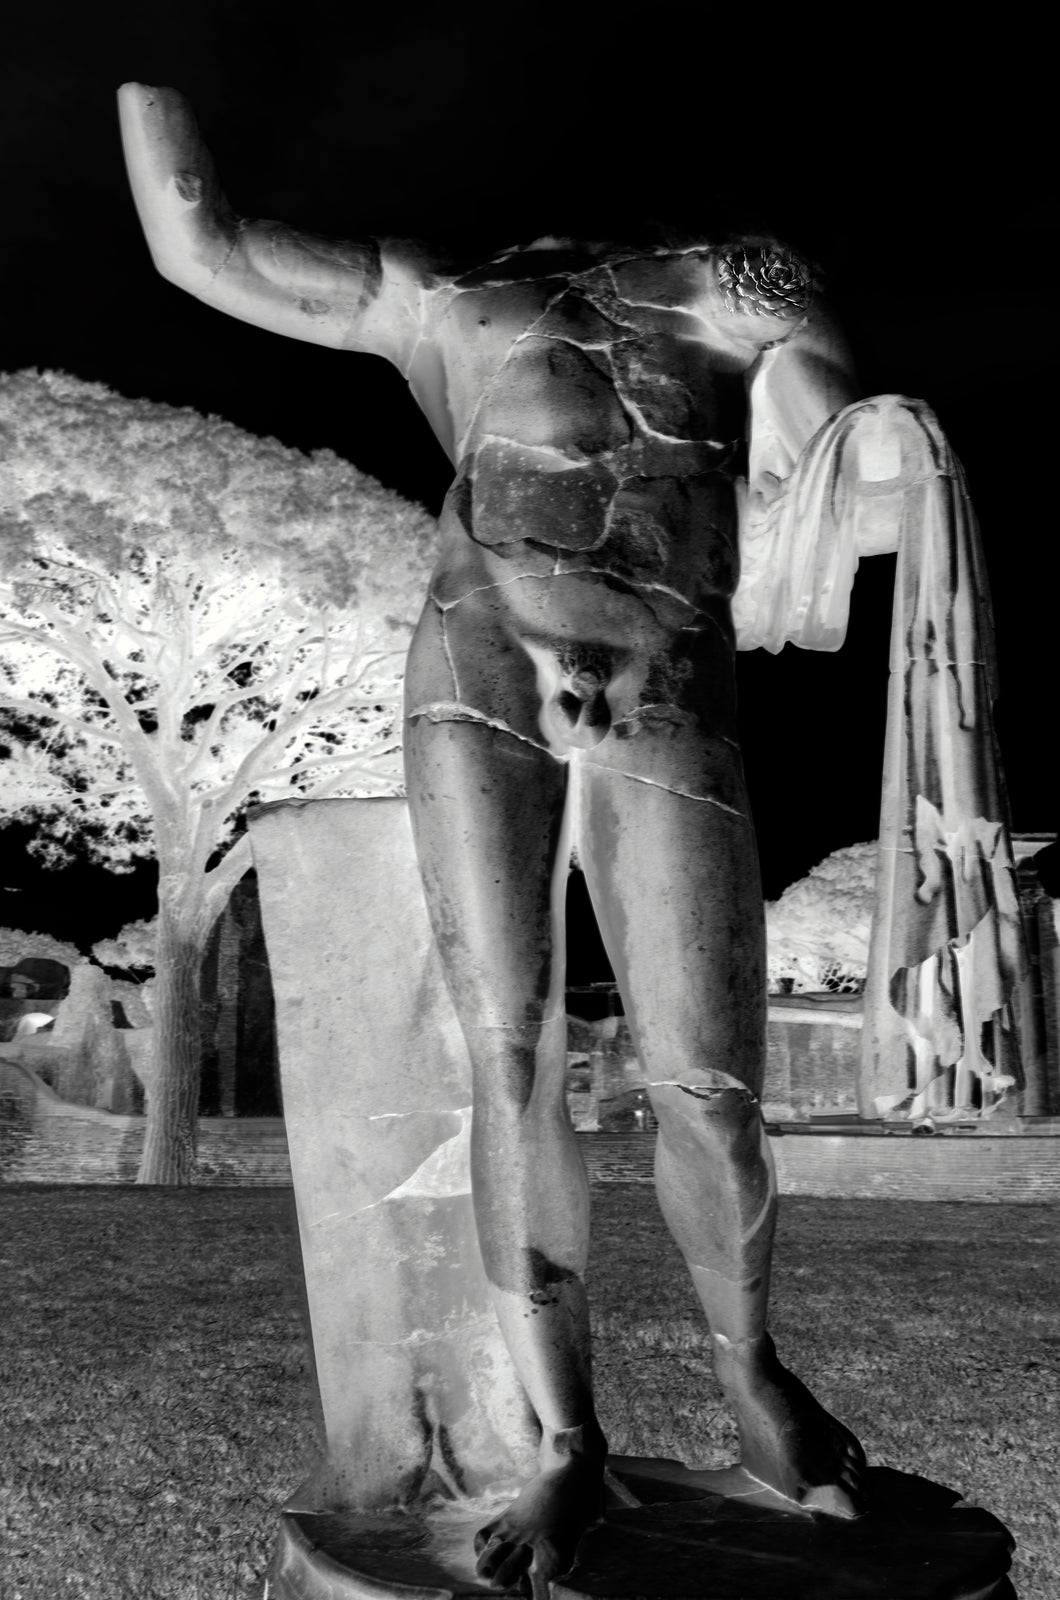 Fragments by Roberta Fineberg, Negative Photography of Antiquities Rome, Italy